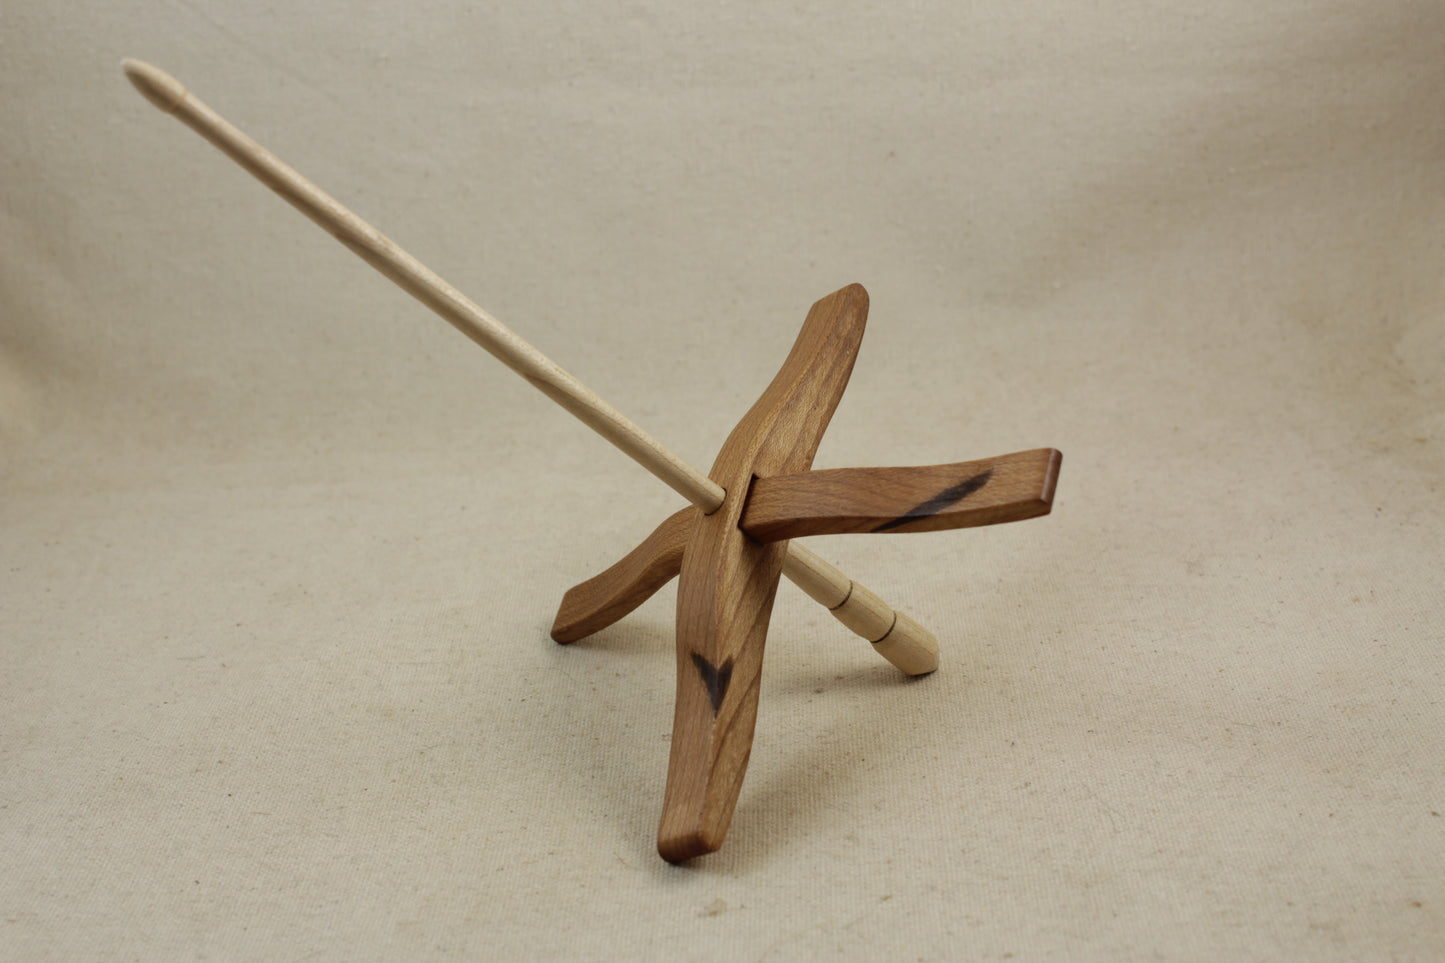 Cherry Full Size Glider Turkish Drop Spindle